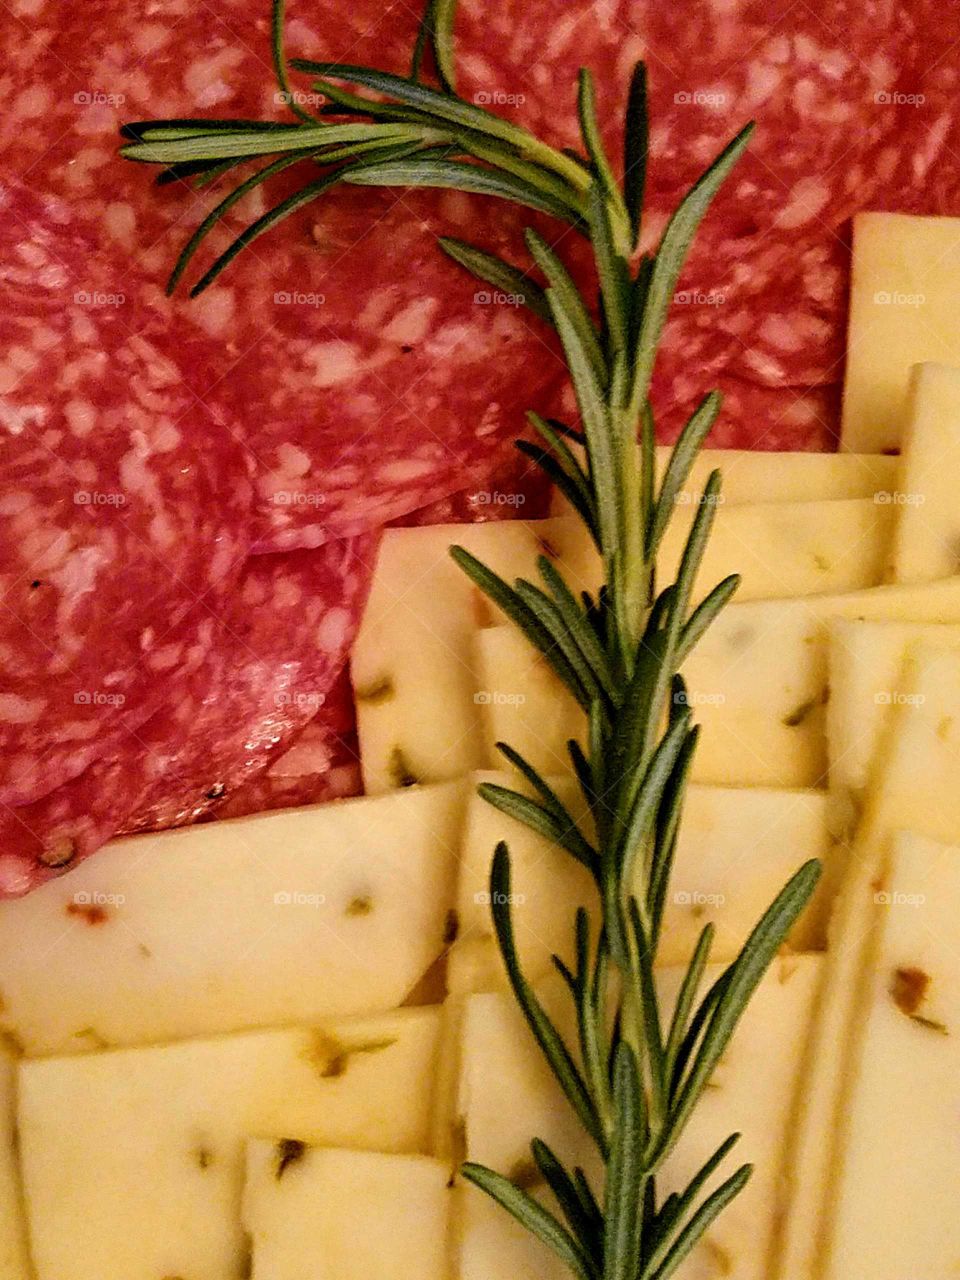 Slice of salami and pineapple with rosemary